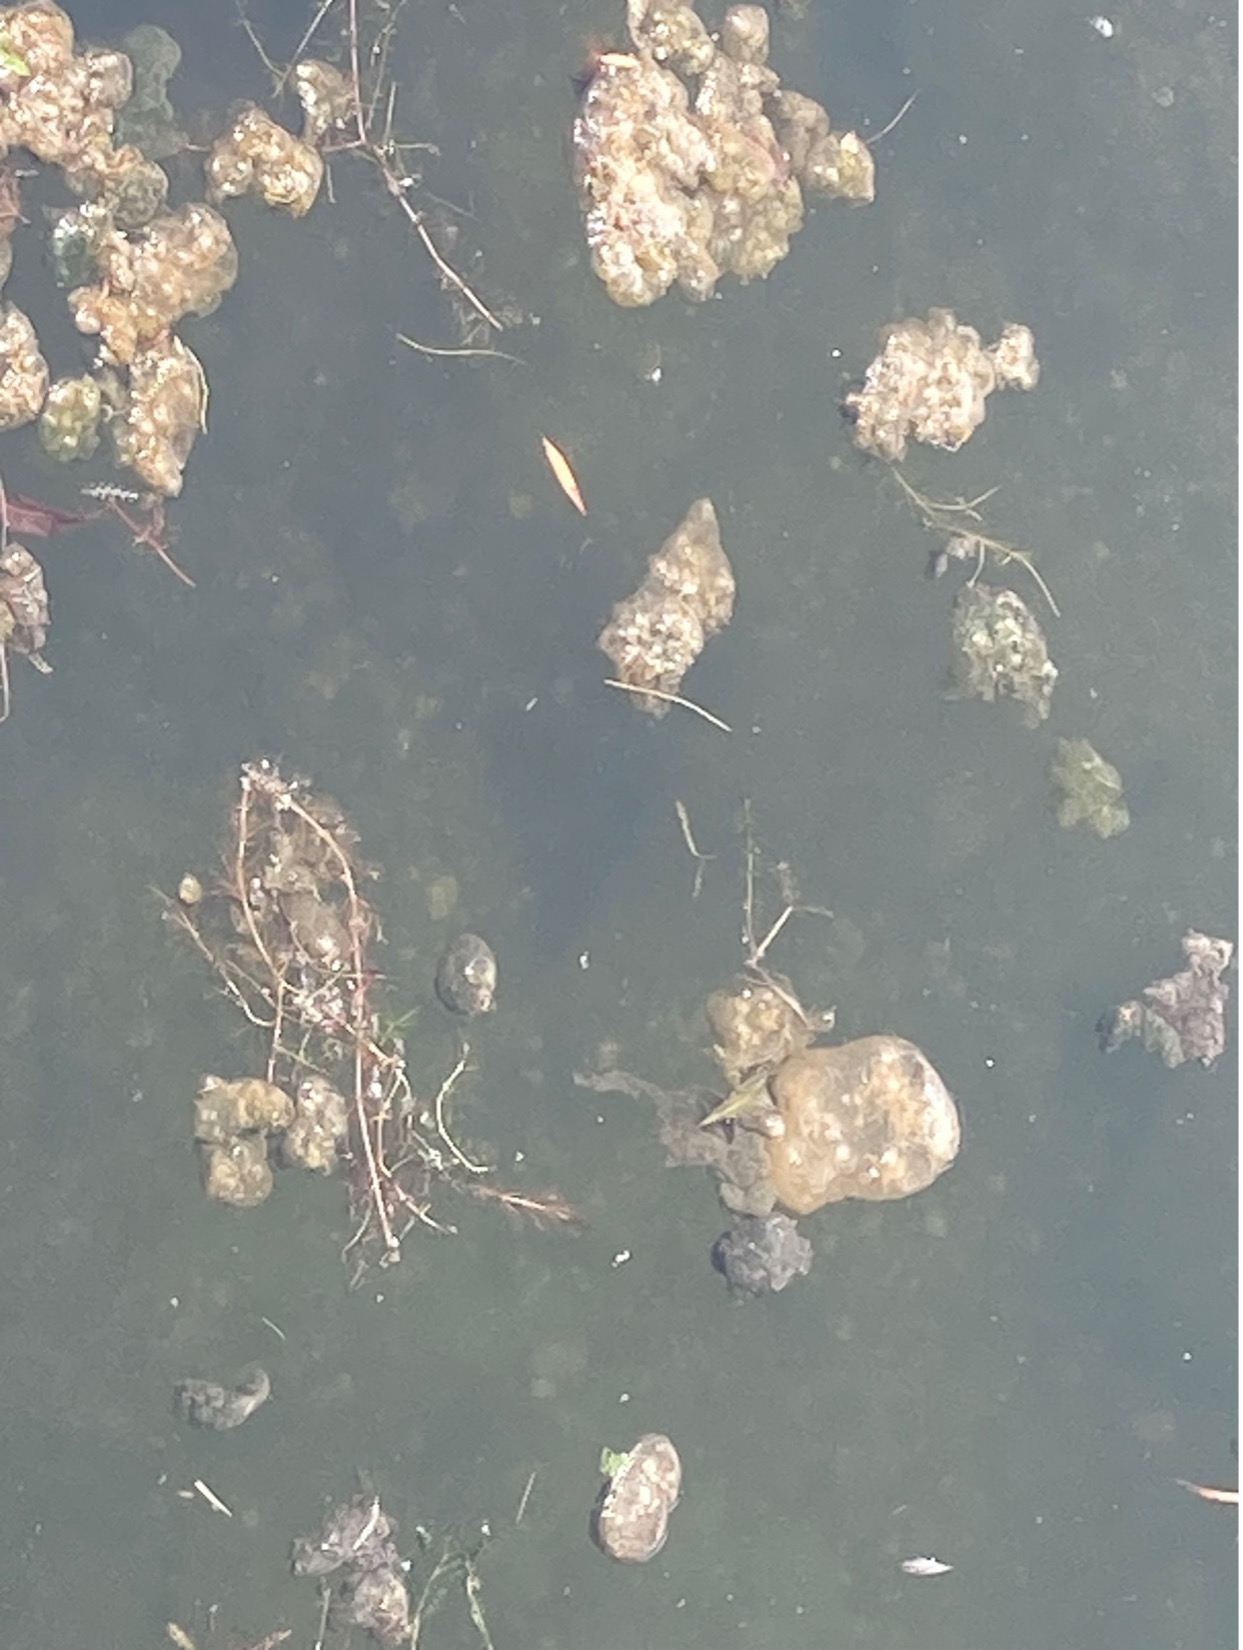 What are those Blobs floating in our lake?